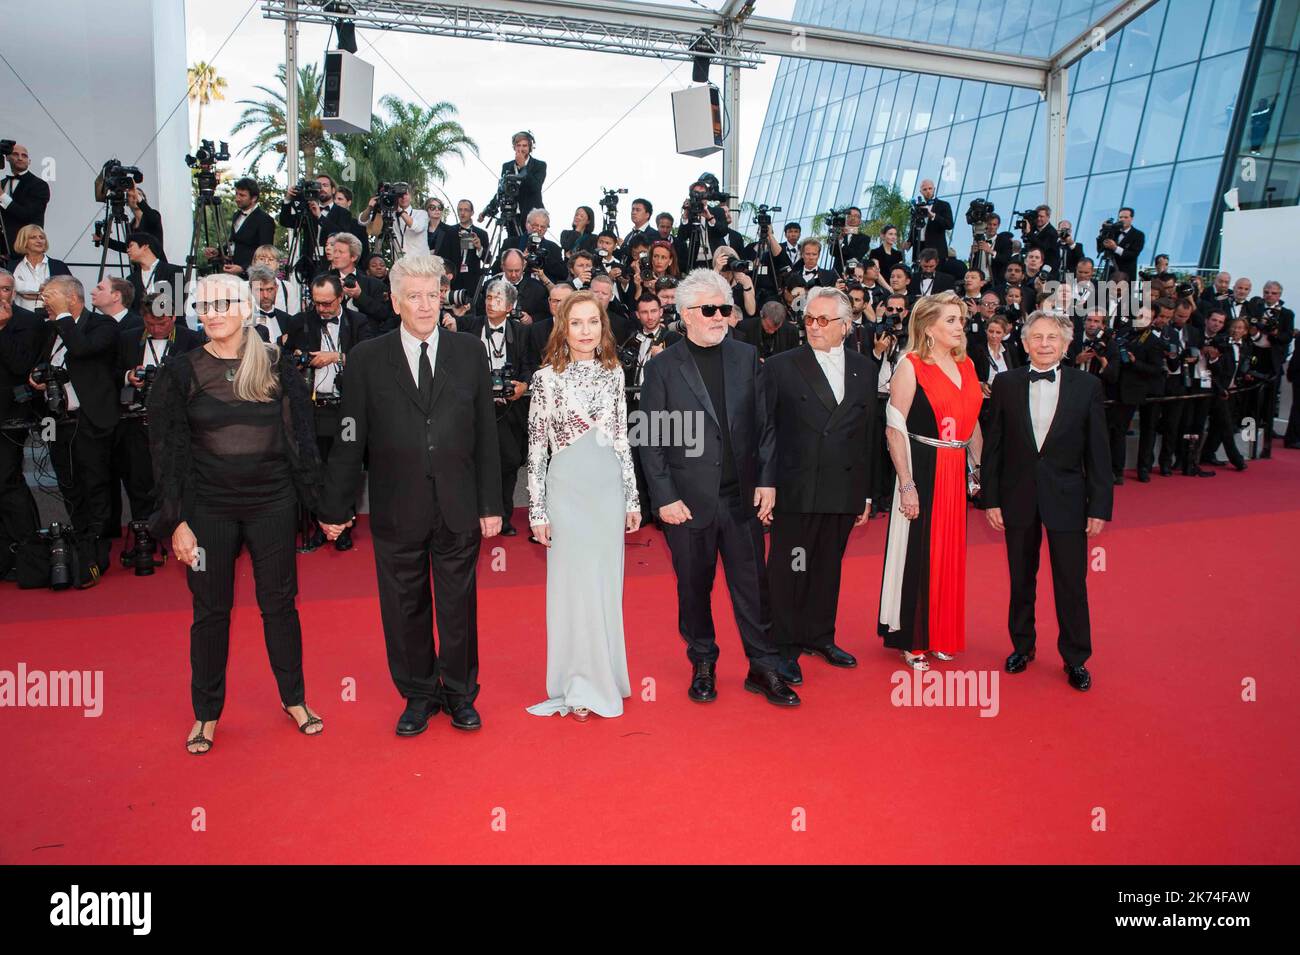 Jury members Paolo Sorrentino, Gabriel Yared and Jessica Chastain, President of the jury Pedro Almodovar and jury members Fan Bingbing, Will Smith, Agnes Jaoui, Maren Ade and Park Chan-wook attend the 70th Anniversary of the 70th annual Cannes Film Festival at Palais des Festivals Stock Photo